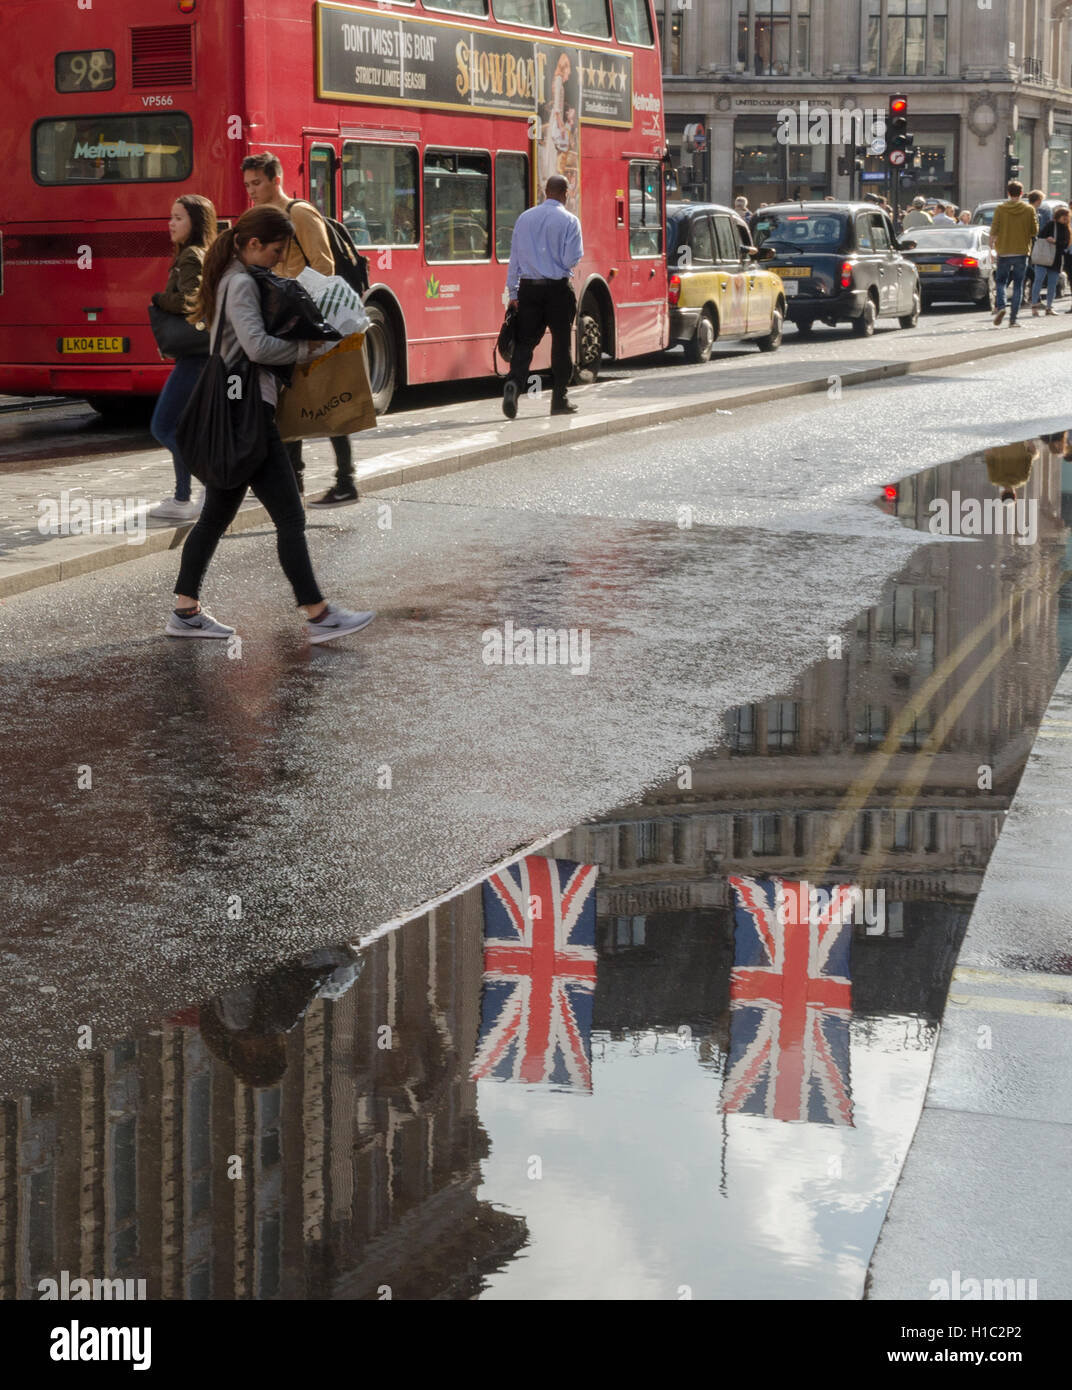 Union Flag, Reflections, London, Red Bus, Lon Bus Stock Photo